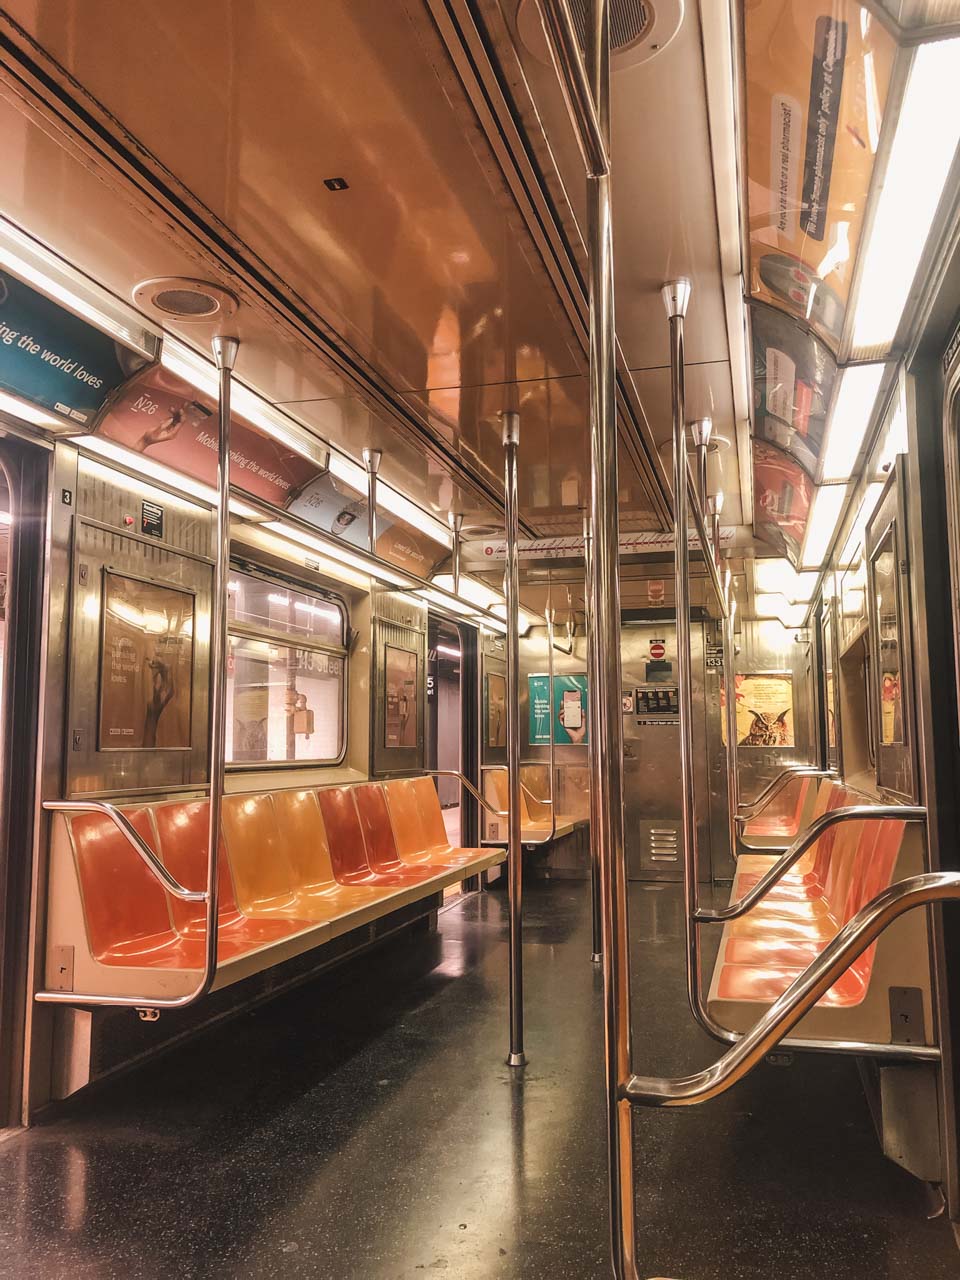 The inside of an empty subway car in New York City